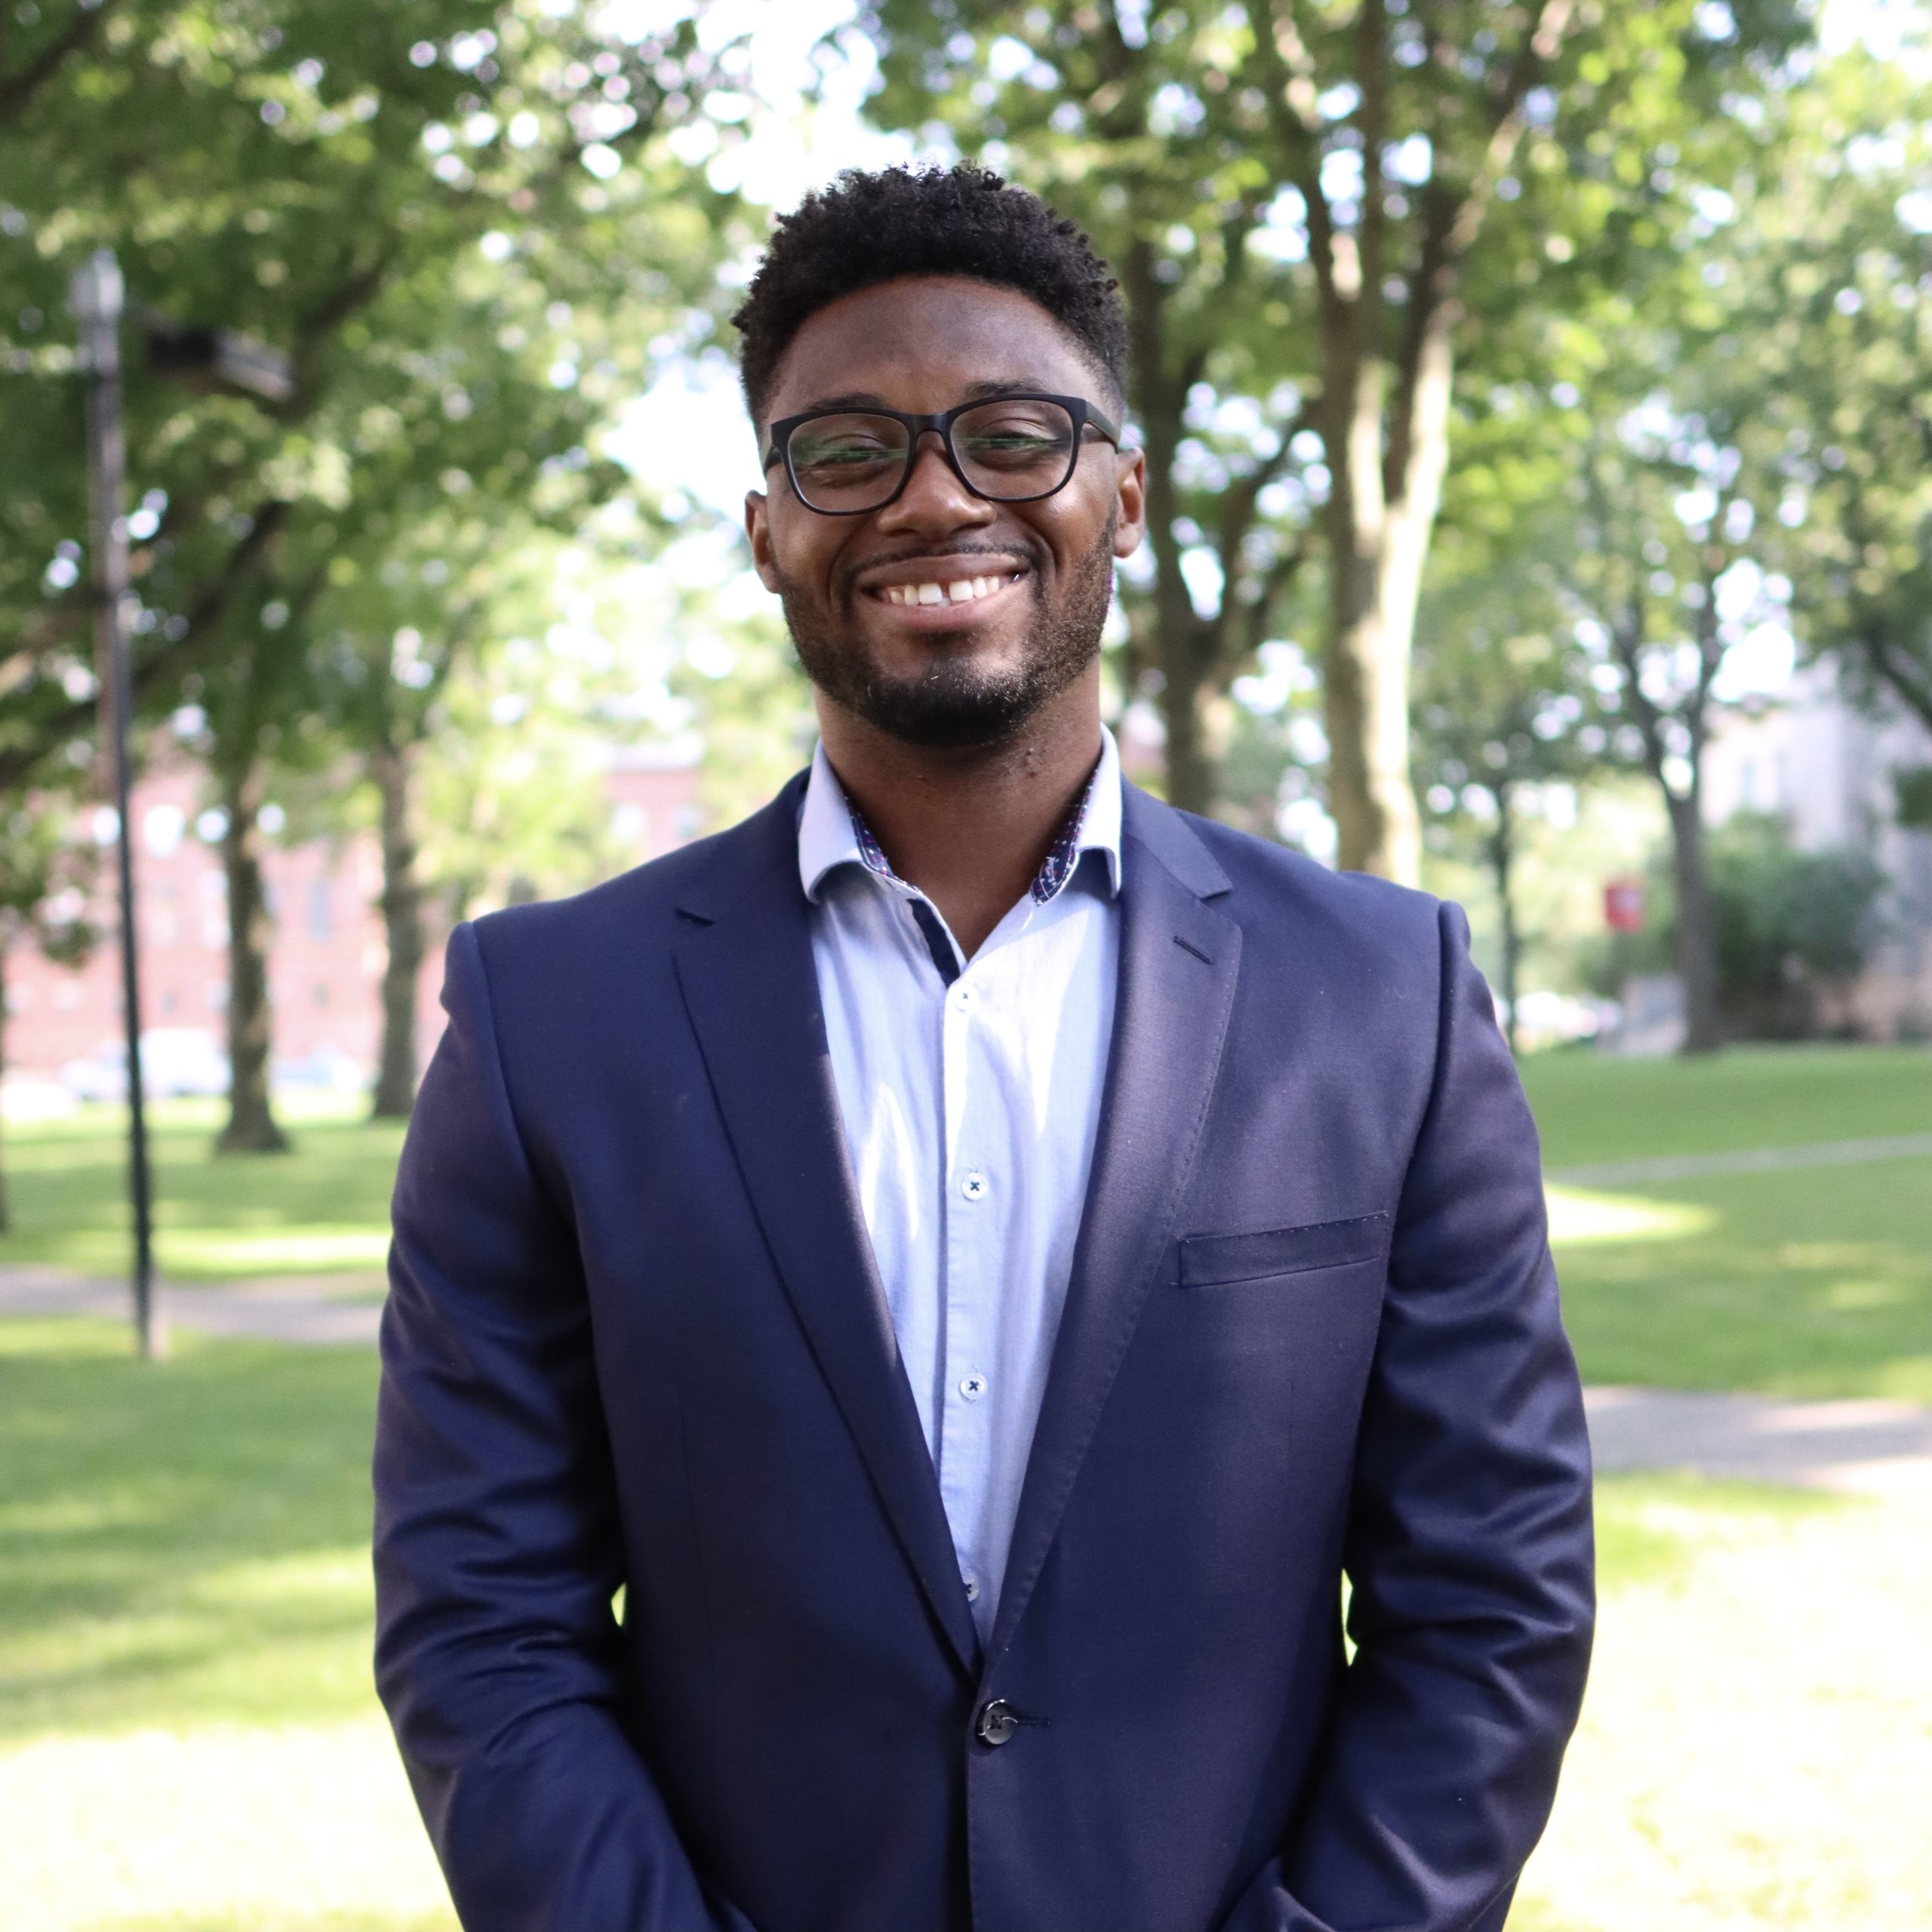 A young Black man wearing a blazer and button-down blue shirt smiles against the Harvard Yard backdrop. He has glasses and some facial hair. Trees dot the landscape behind him.